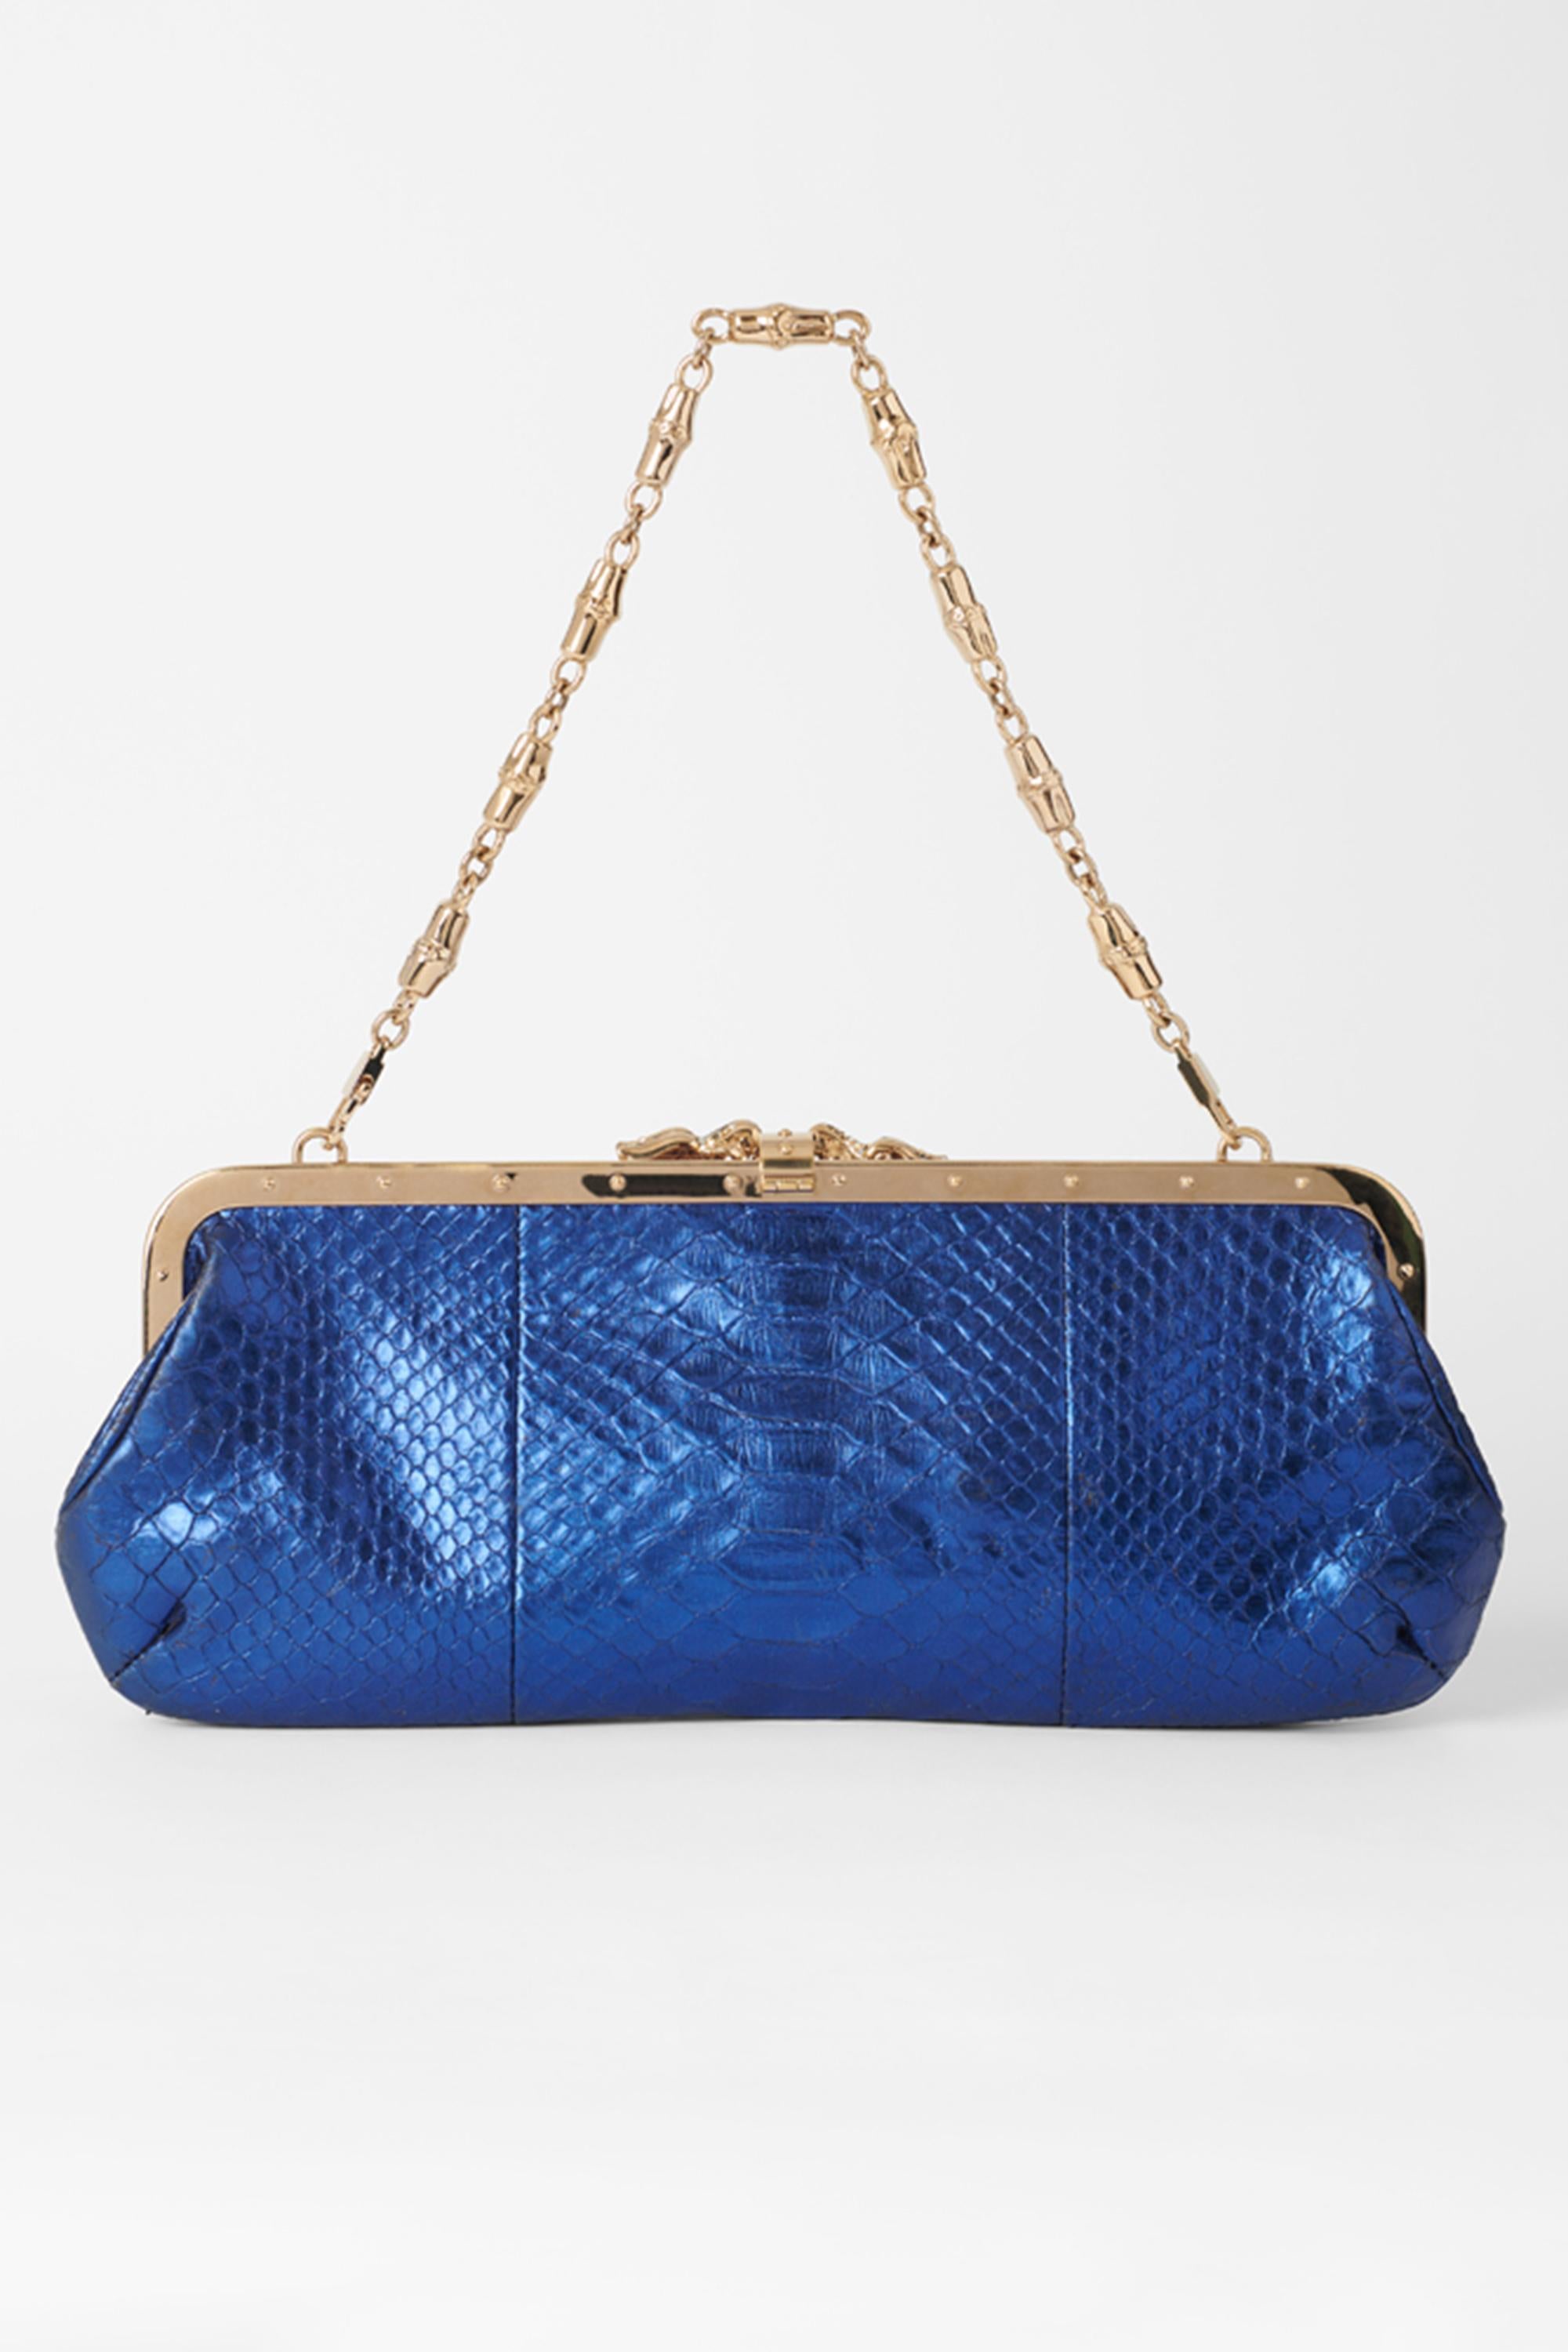 We are excited to present this Gucci by Tom Ford Fall Winter 2004 blue clutch. Features embellished dragon centre with pearl centre, blue iridescent snake body, gold detachable shoulder chain and inside back pocket. In great vintage condition.